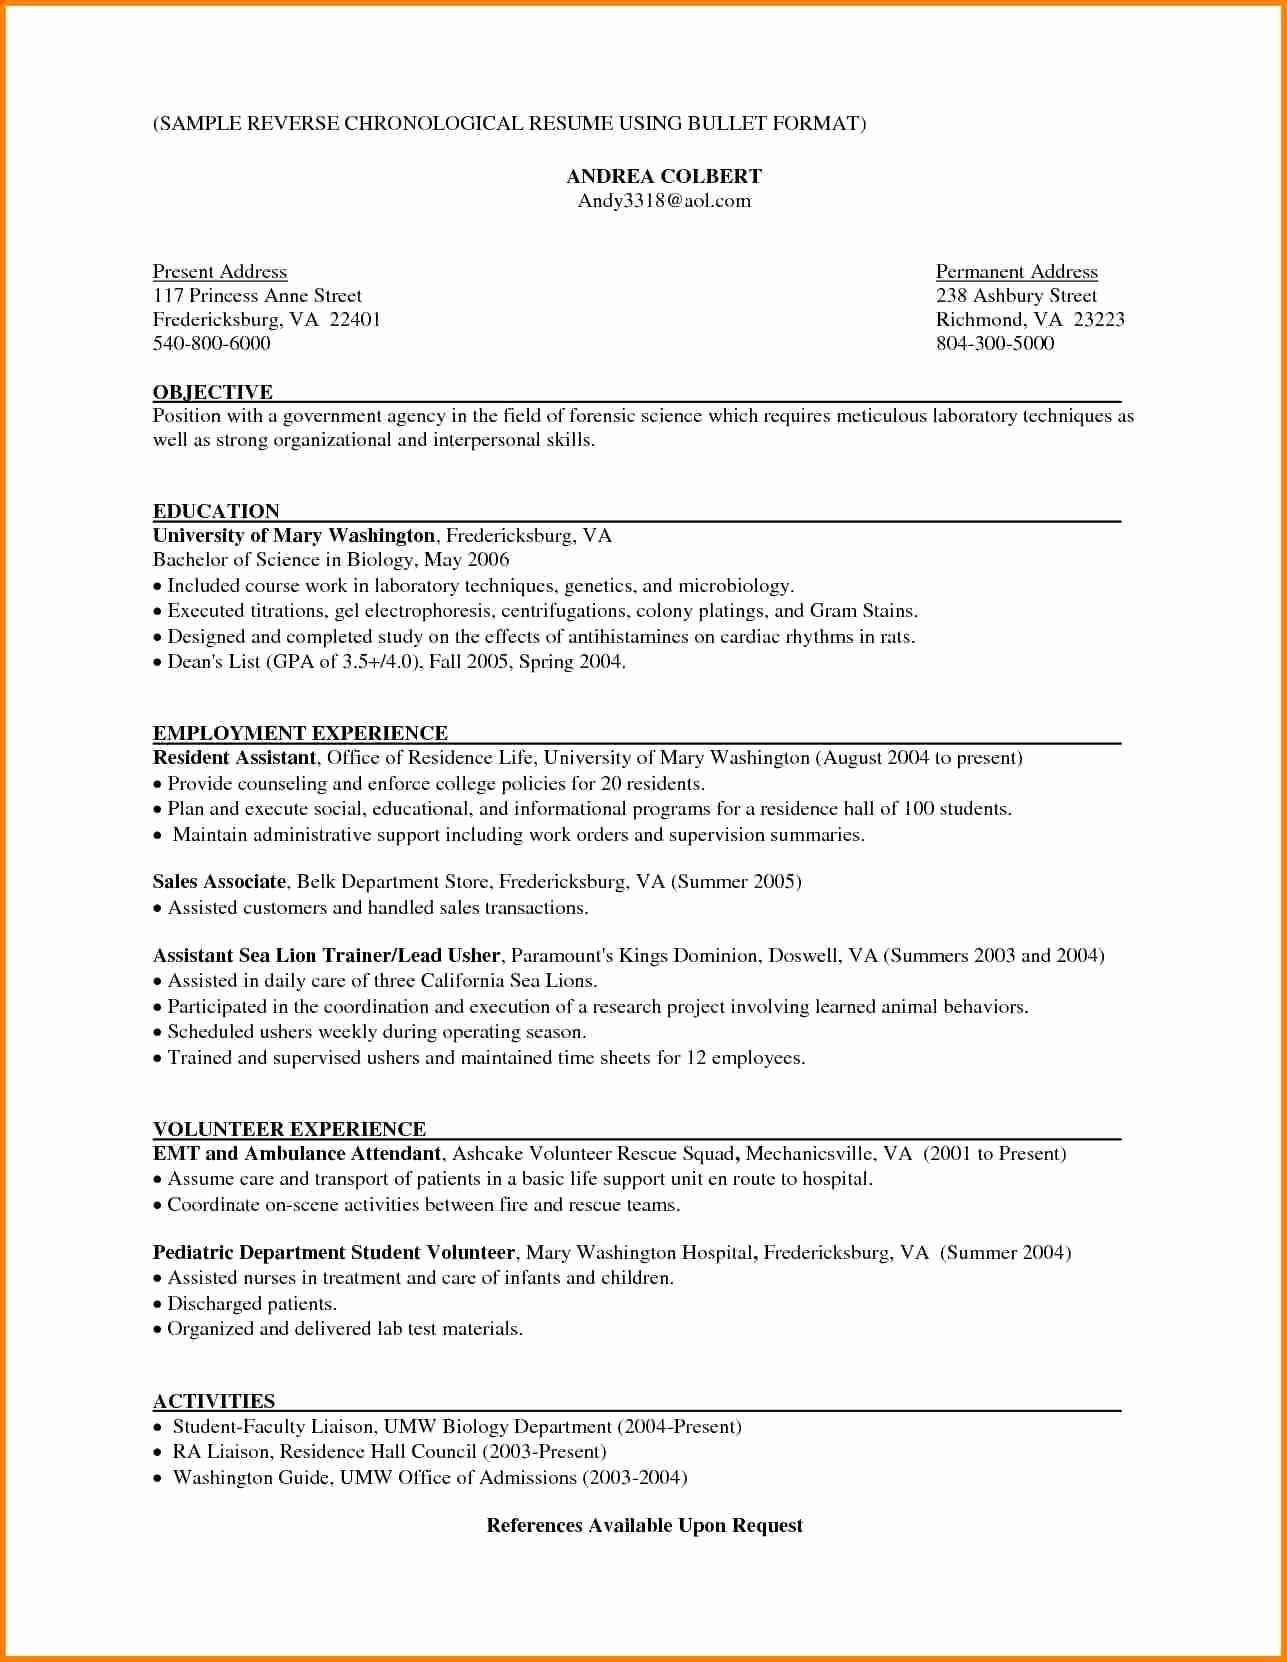 Social Skills Worksheets for Kids together with social Work Resume Template Free New Resume Puter Skills Examples